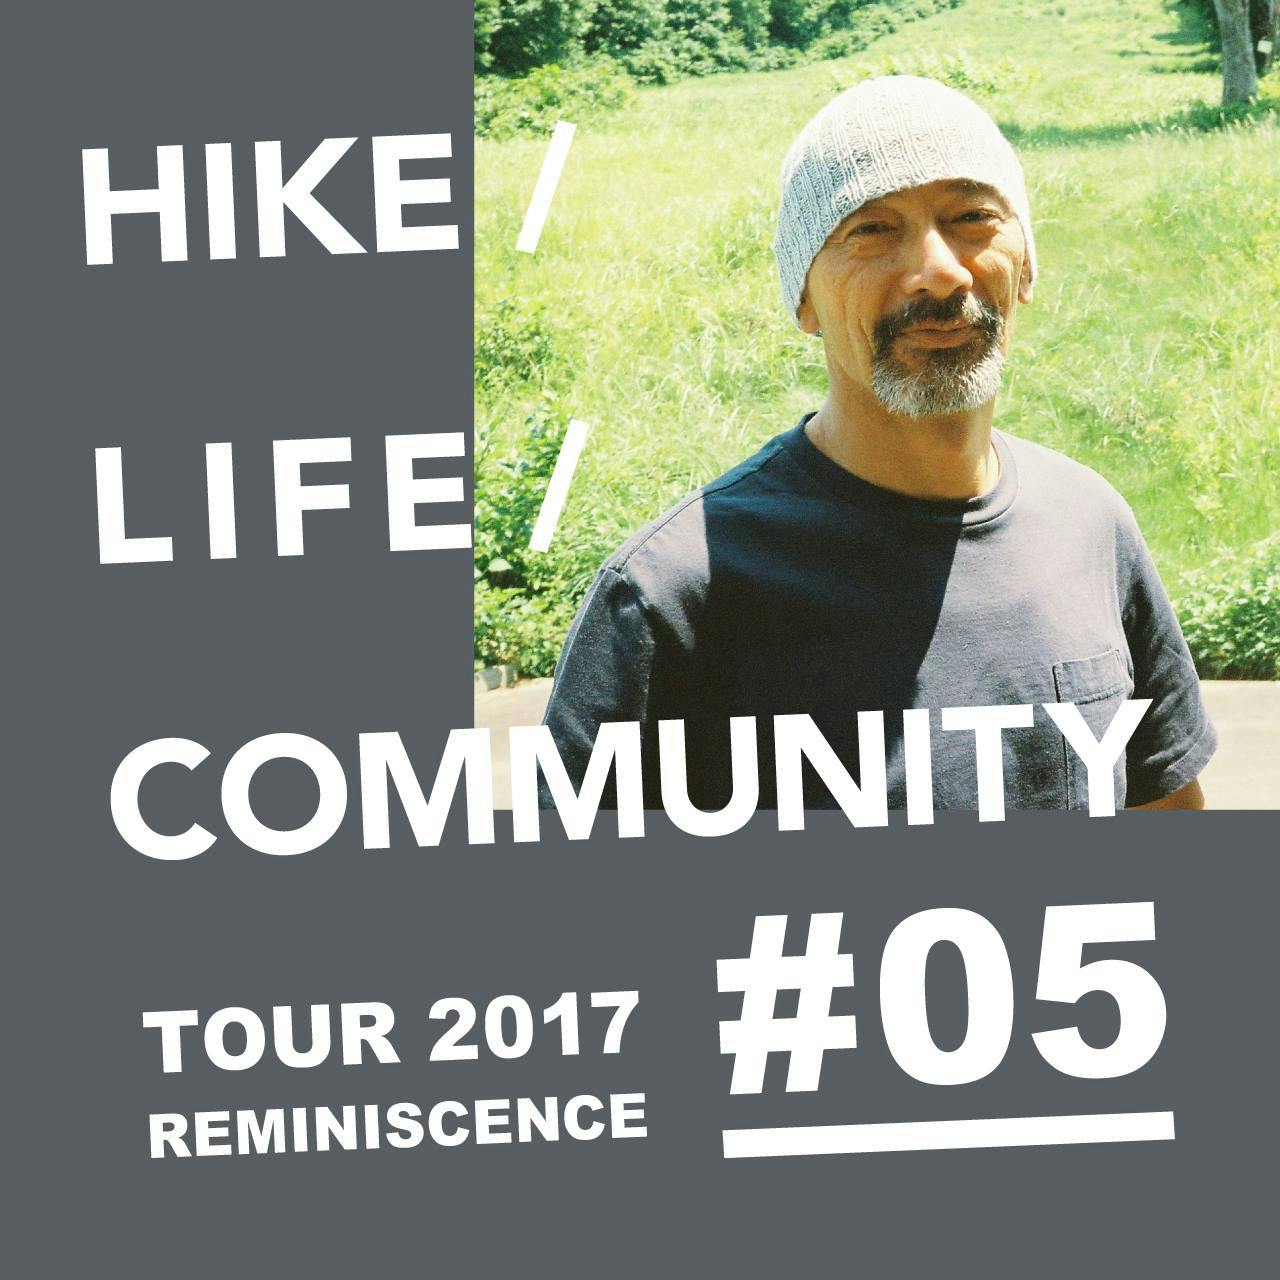 HIKE / LIFE / COMMUNITY <br> TOUR 2017 REMINISCENCE<br> #05 相馬浩義（八甲田山ガイドクラブ）